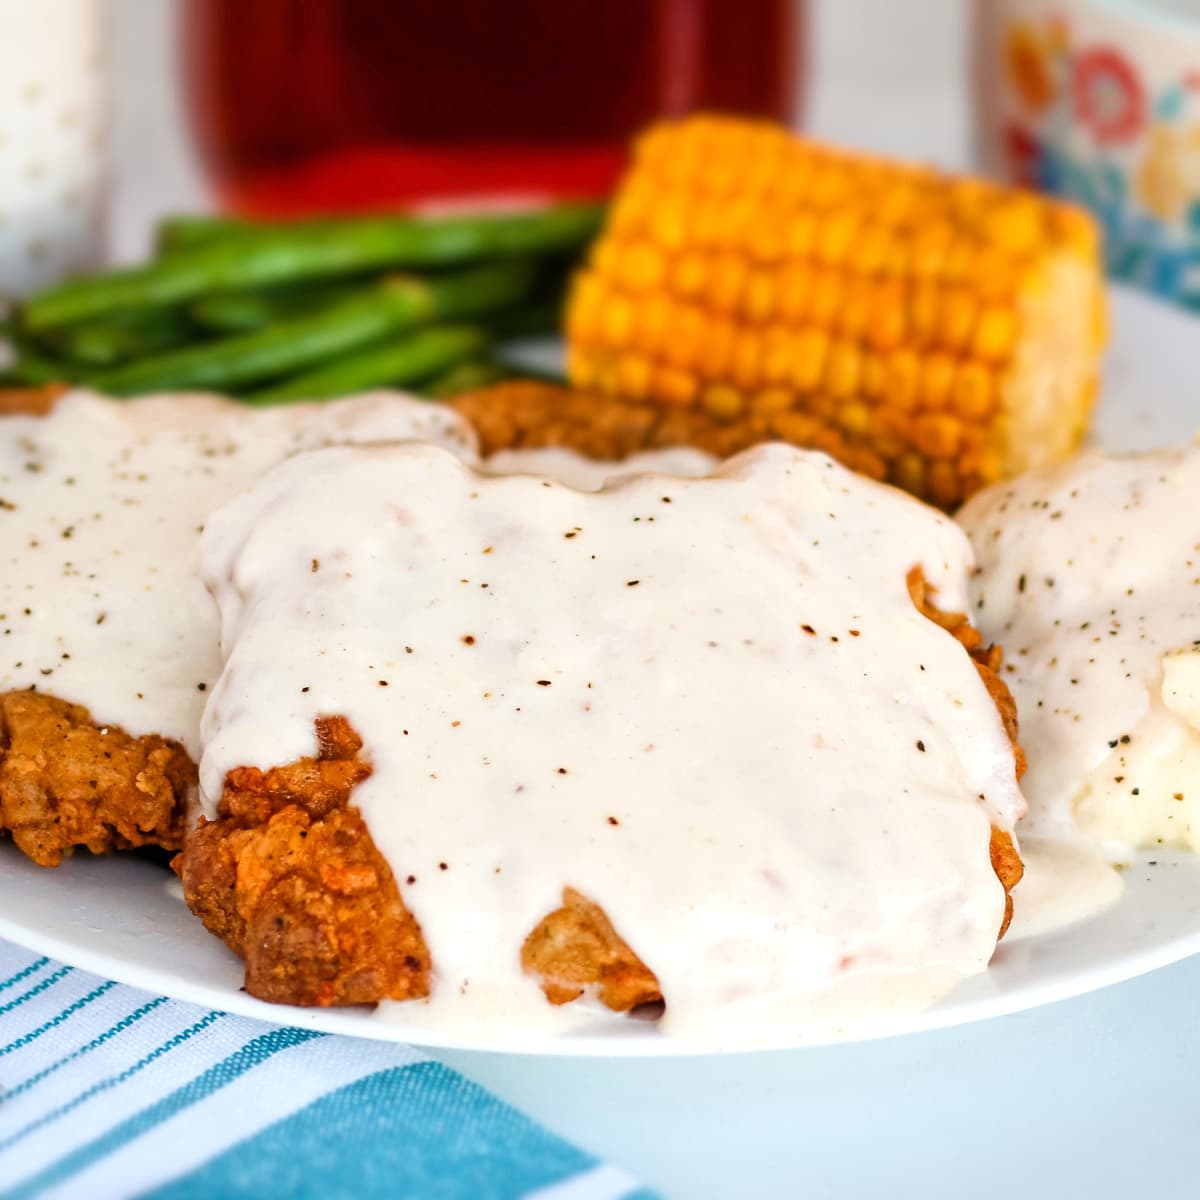 Pan fried venison steak topped with white cream gravy on a white plate.